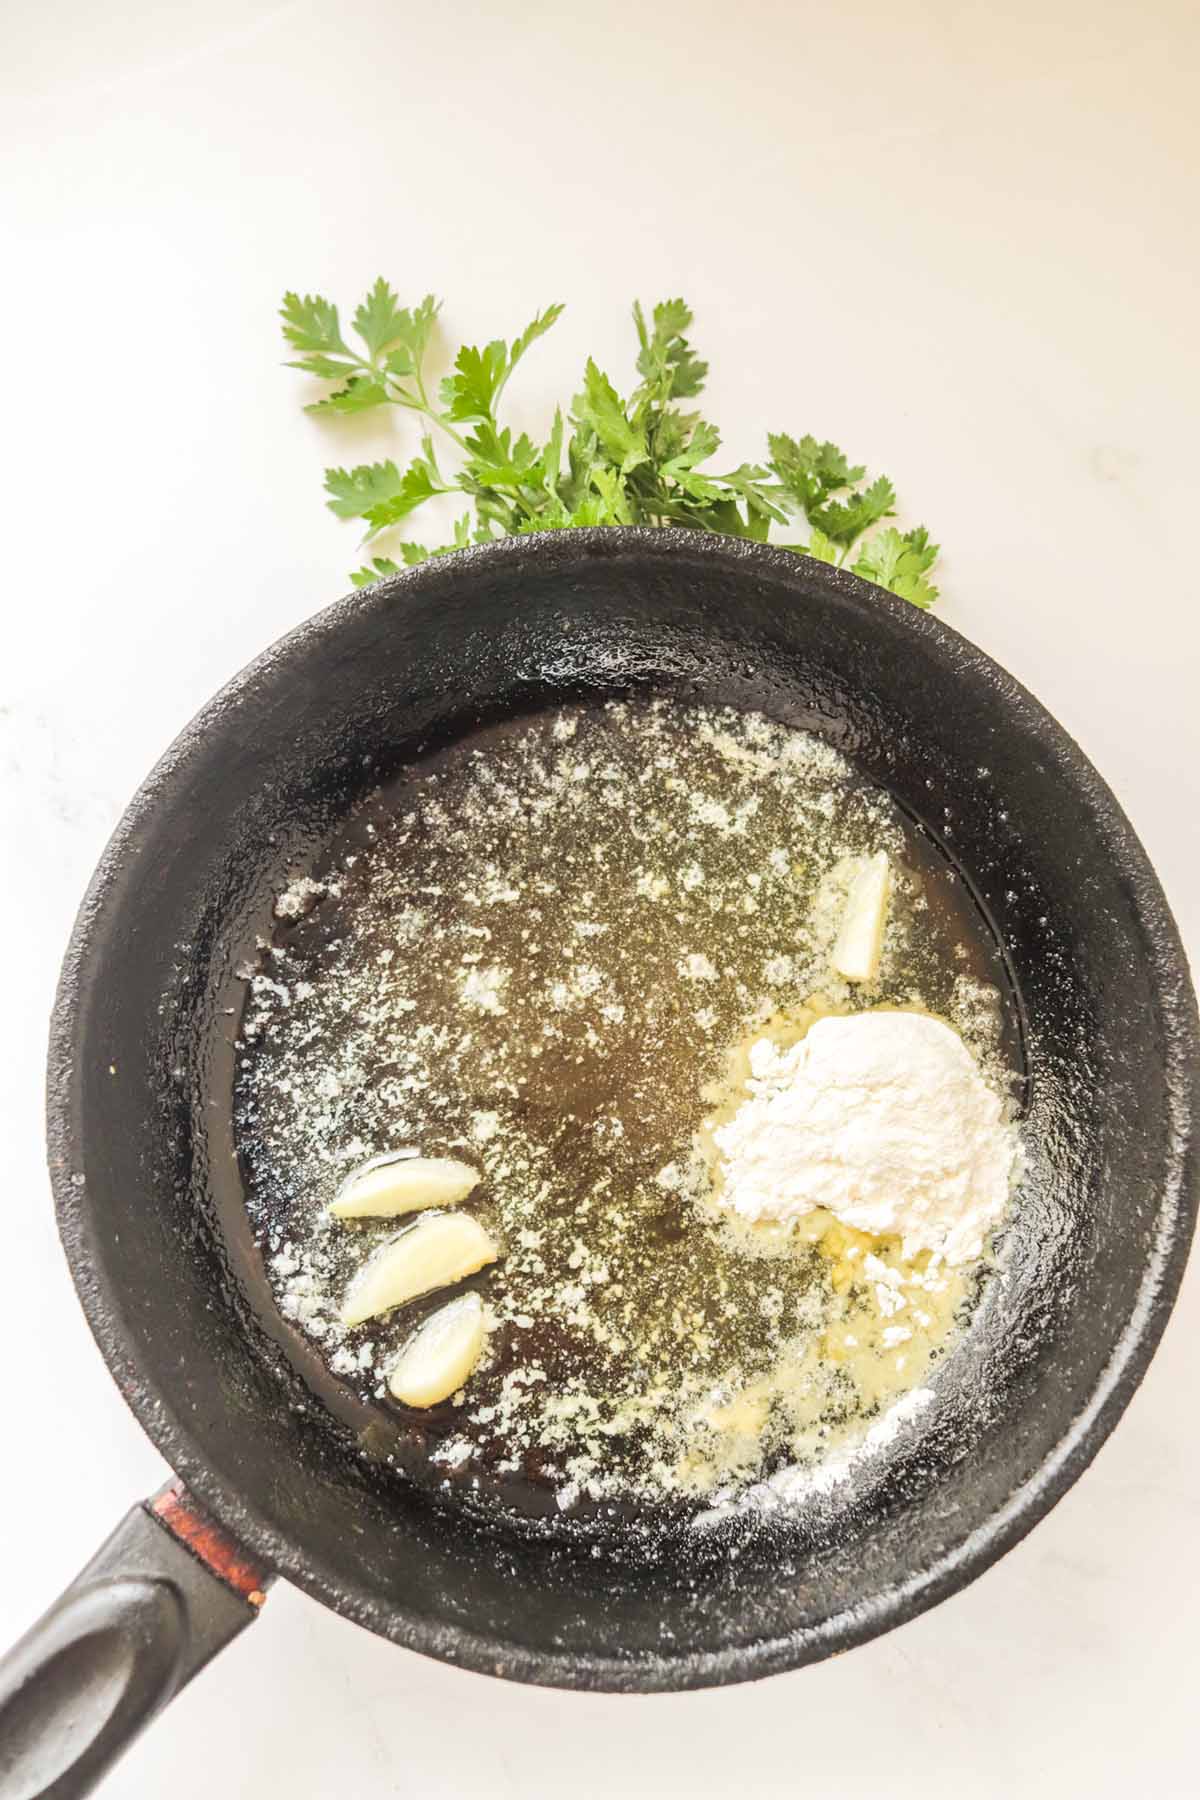 Oil, garlic and flour added to a skillet.